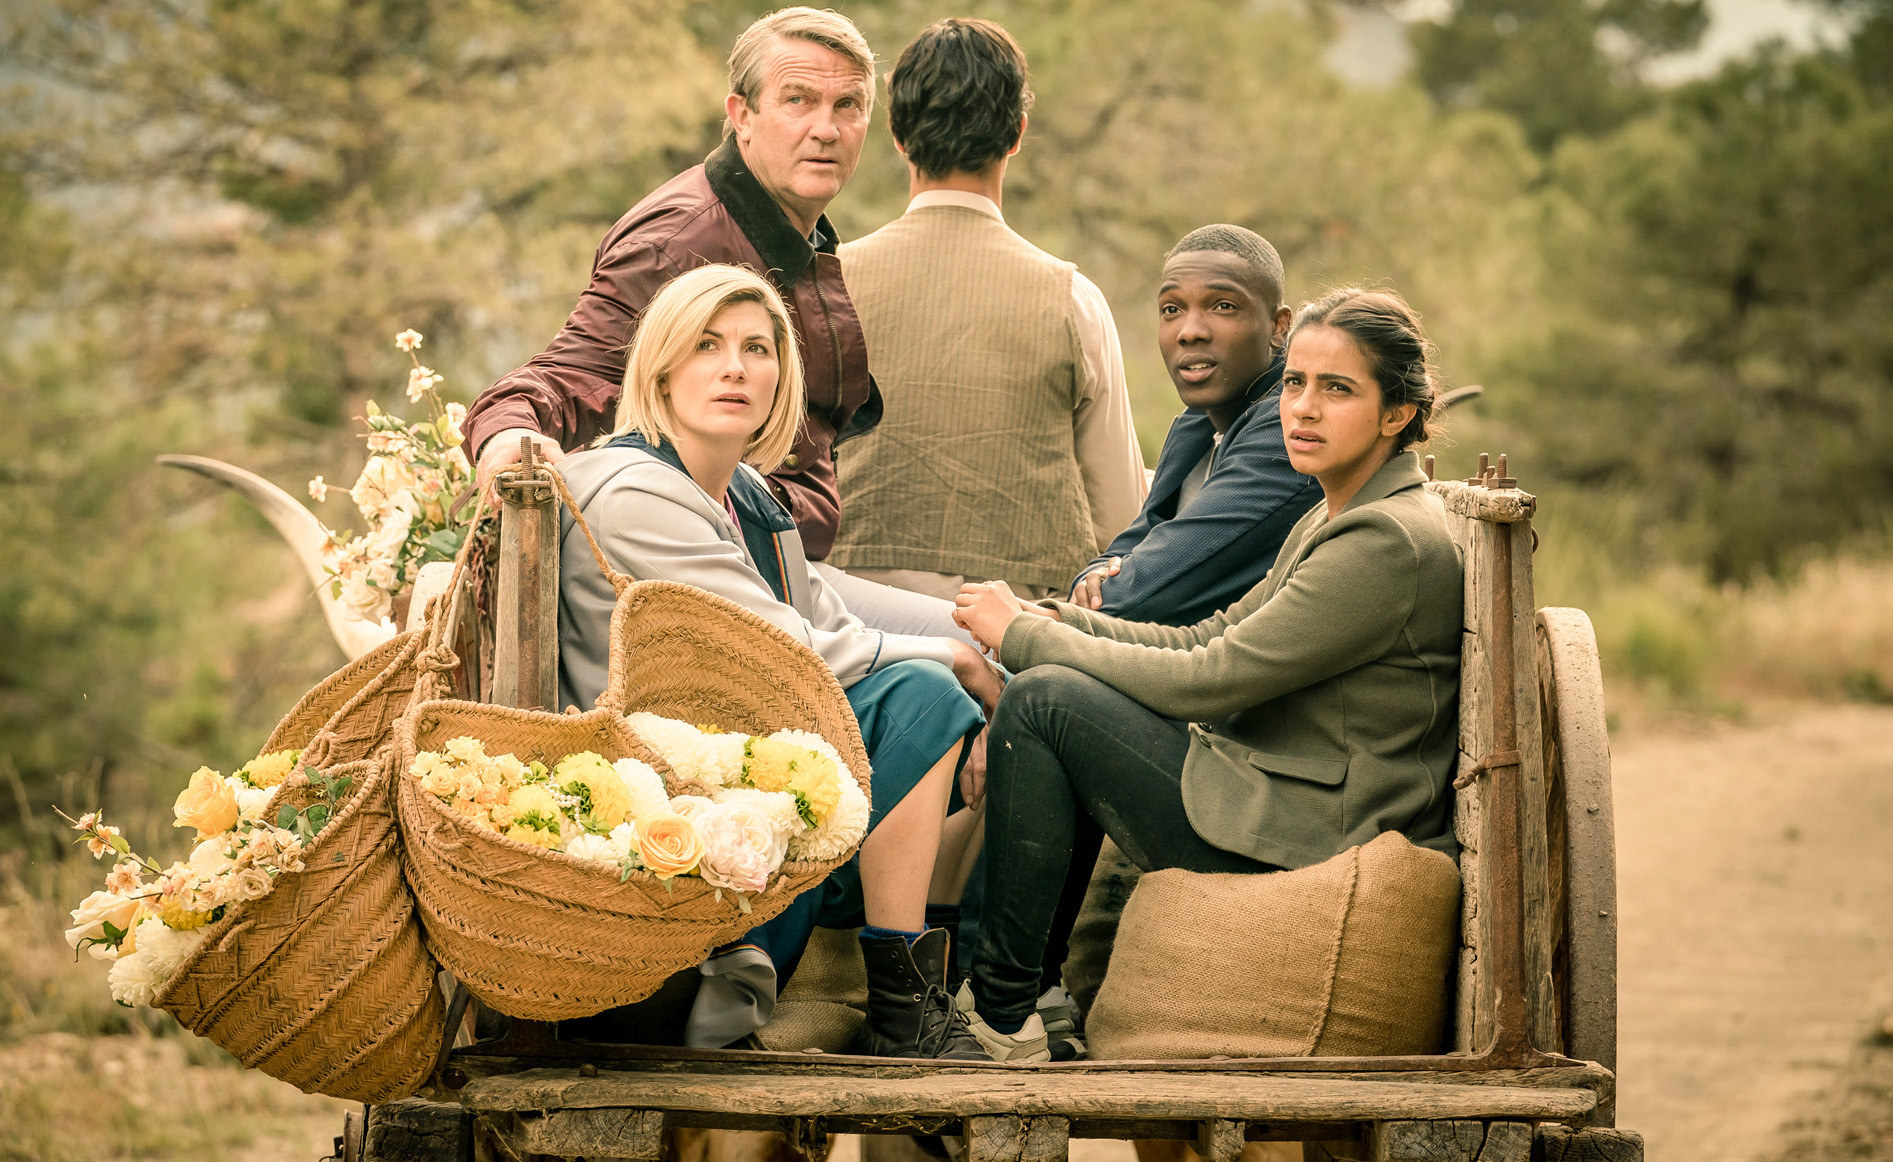 Still from an episode of Doctor Who show the Doctor, Yaz, Ryan, and Graham aboard a cart on a dusty road looking at something off camera